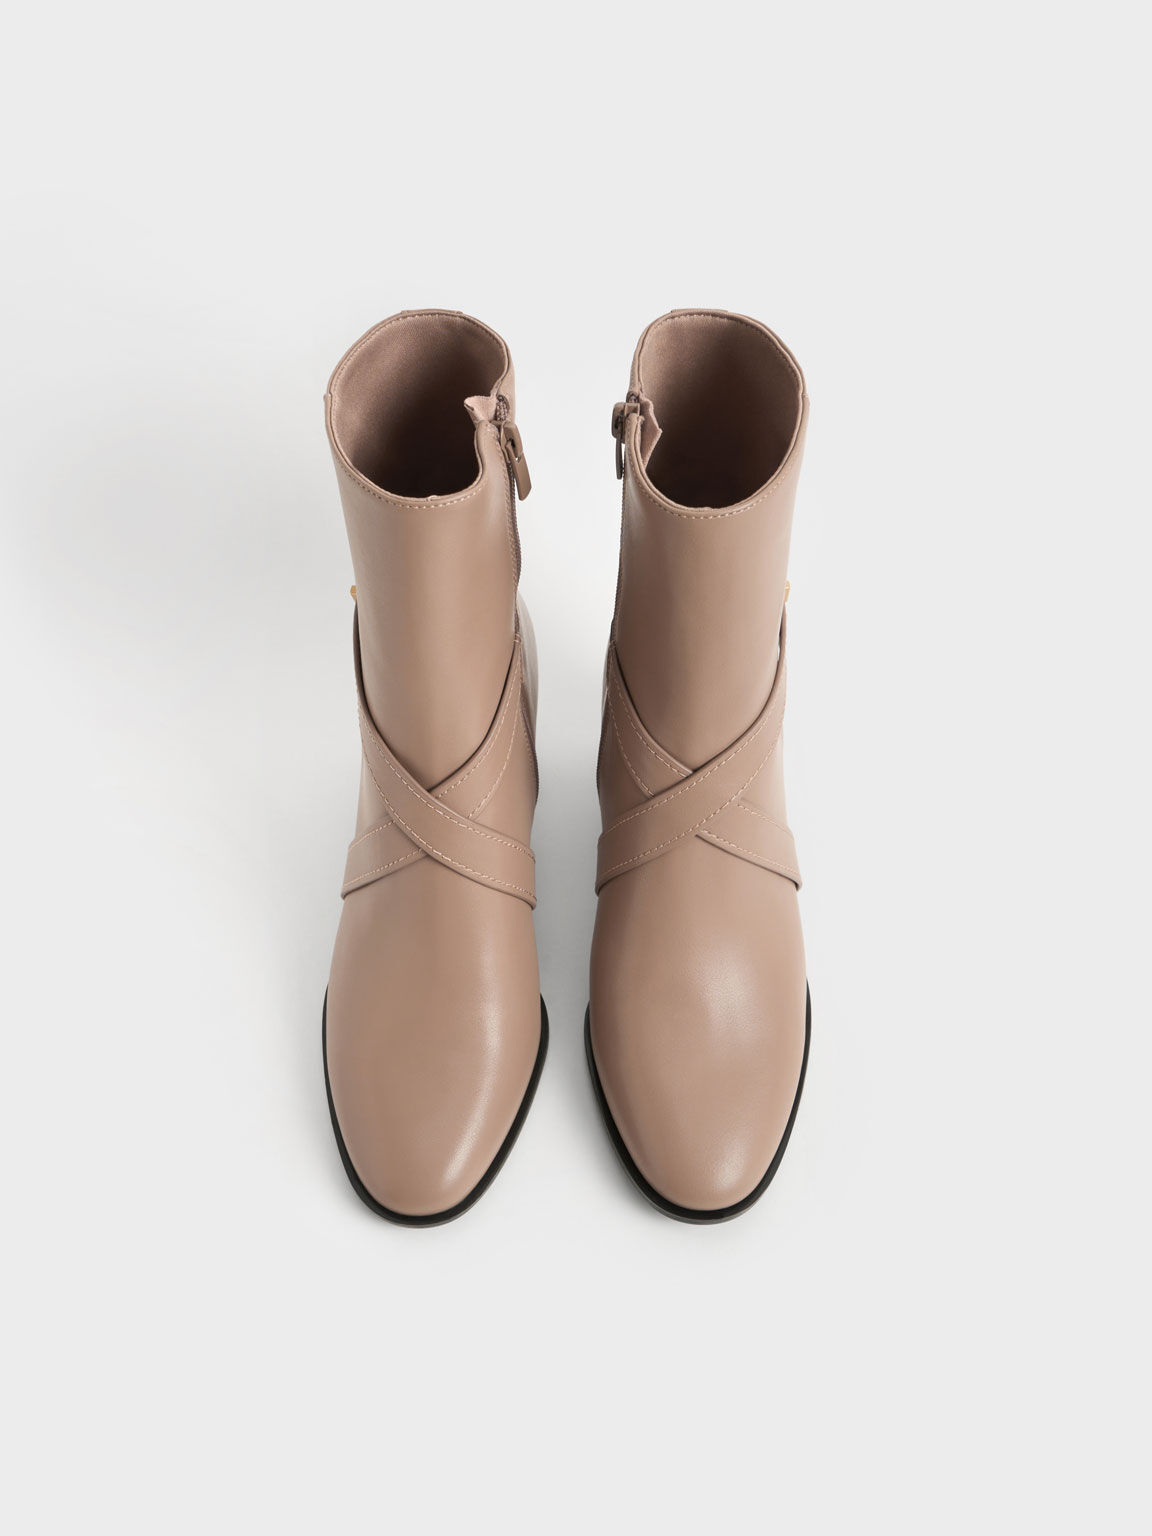 Metallic Accent Crossover Ankle Boots, Camel, hi-res